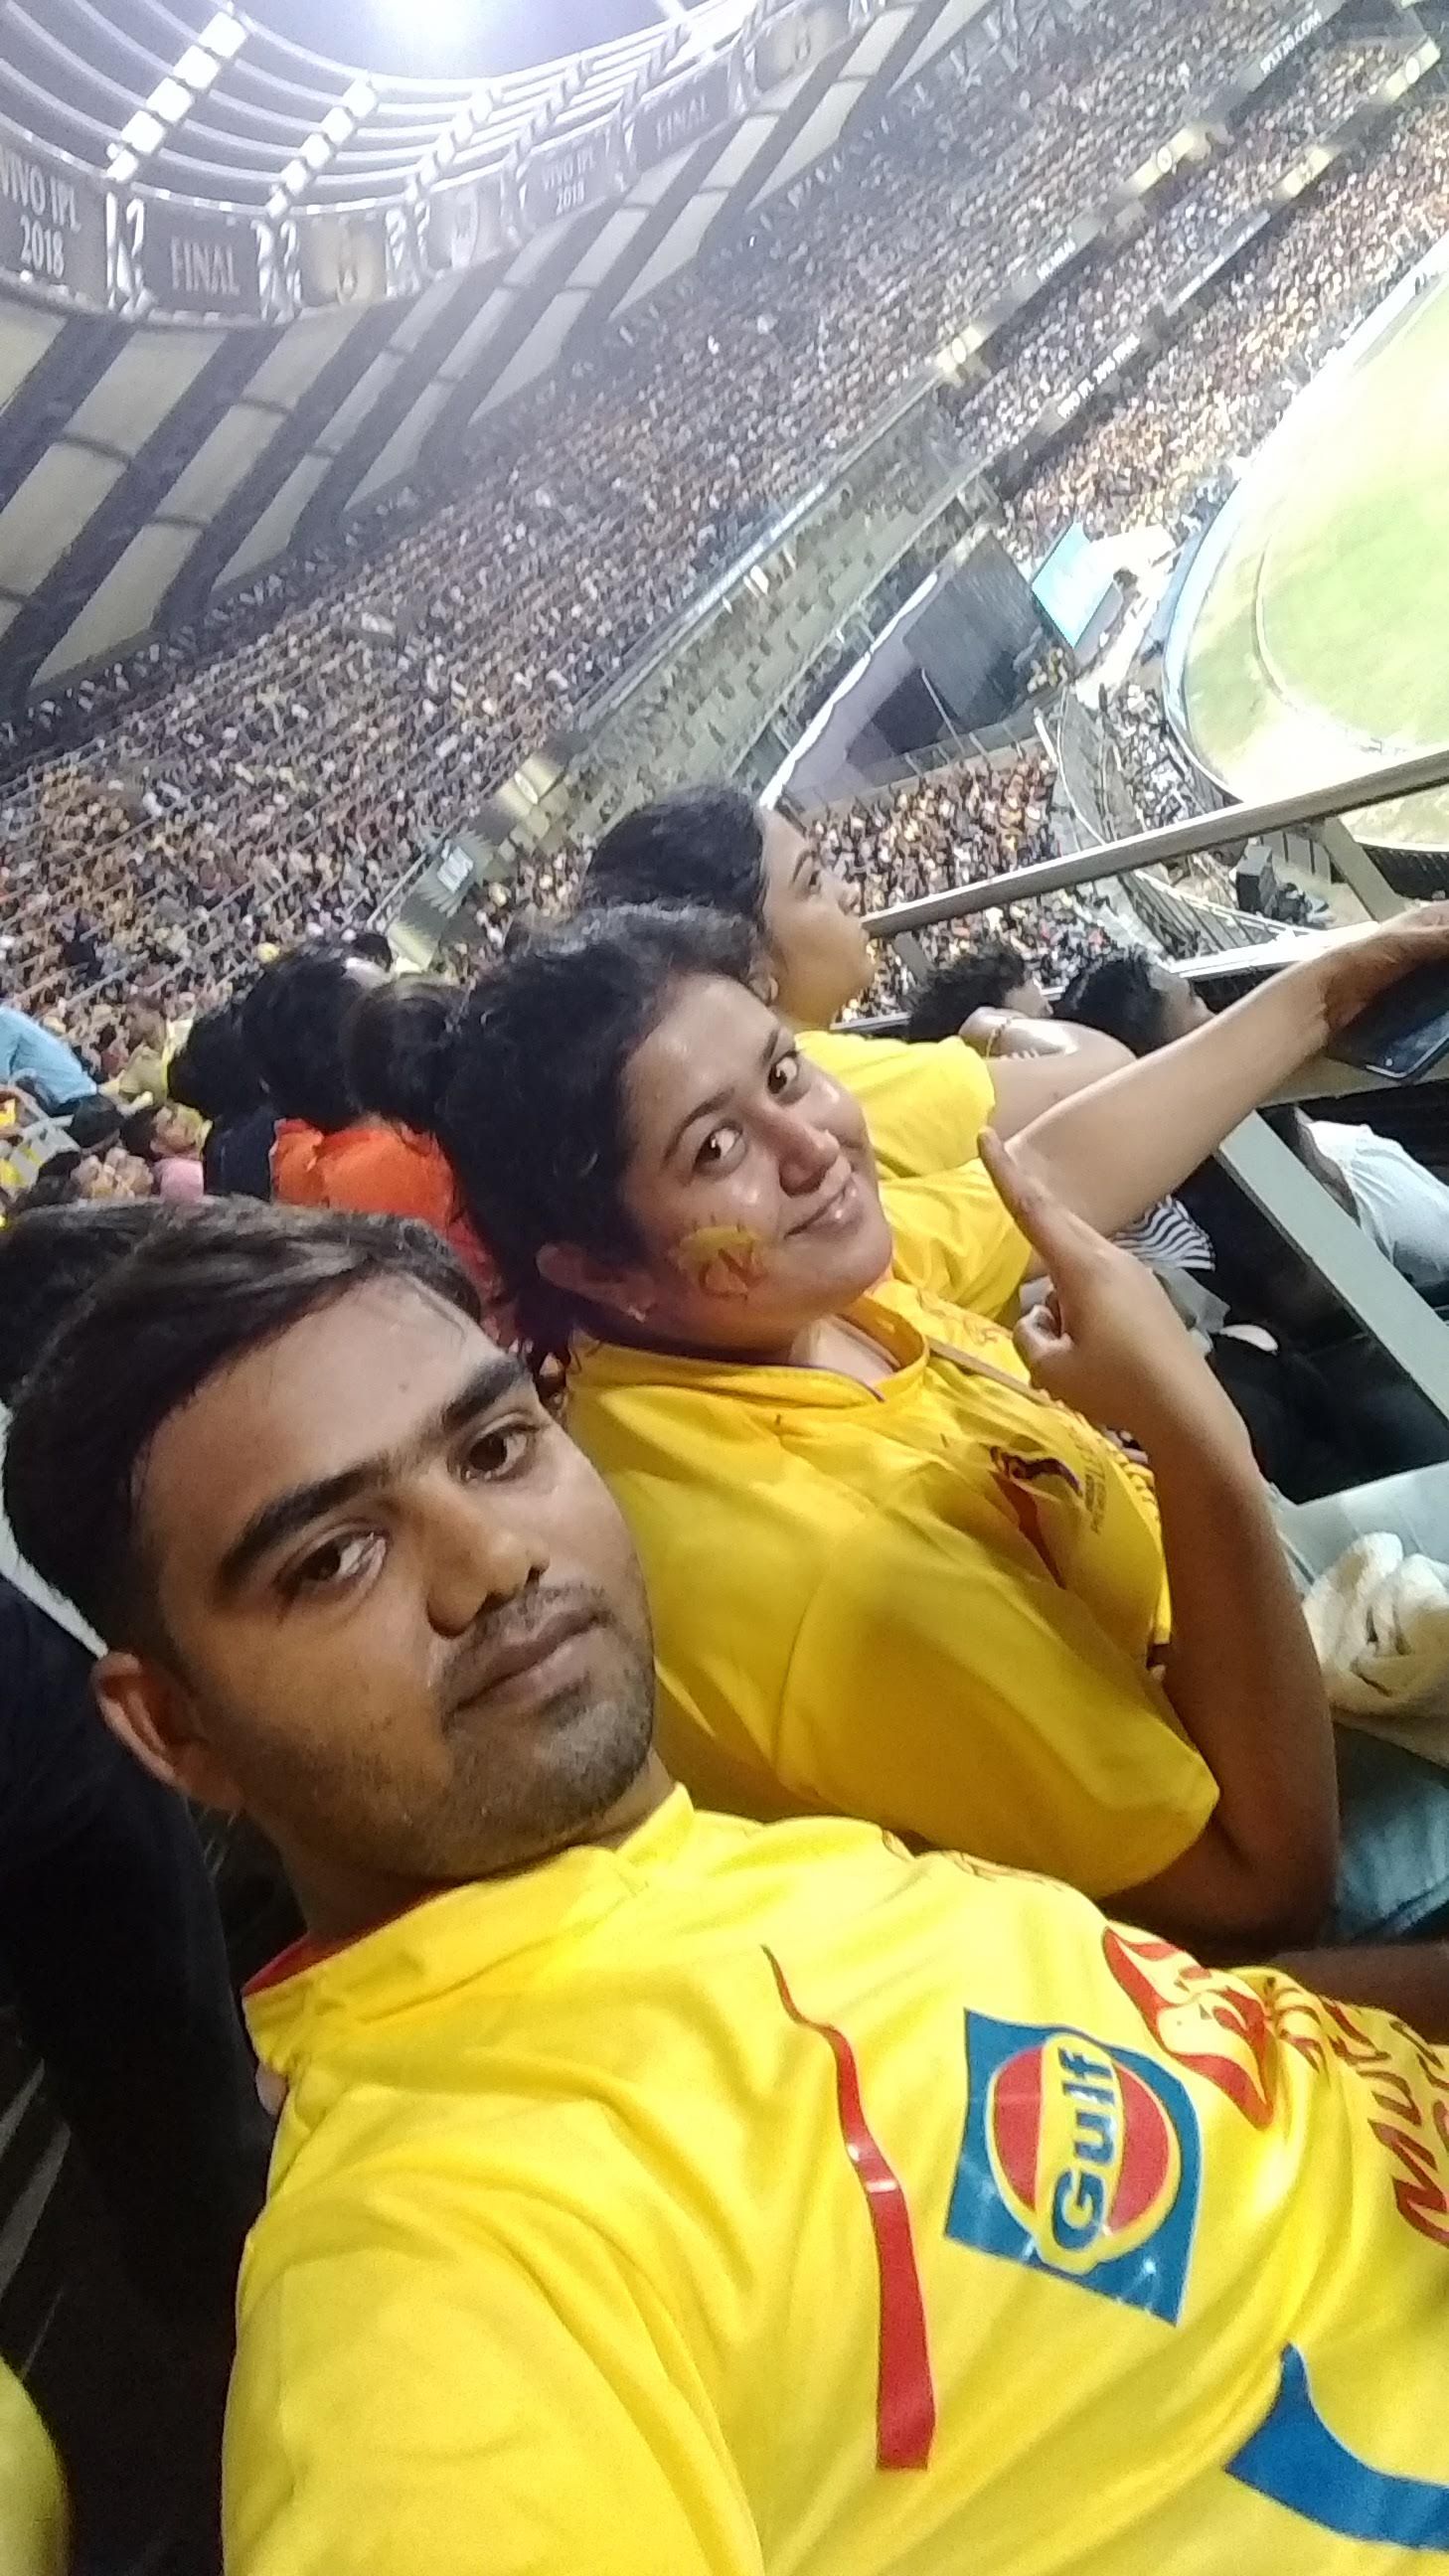 watched IPL final in May